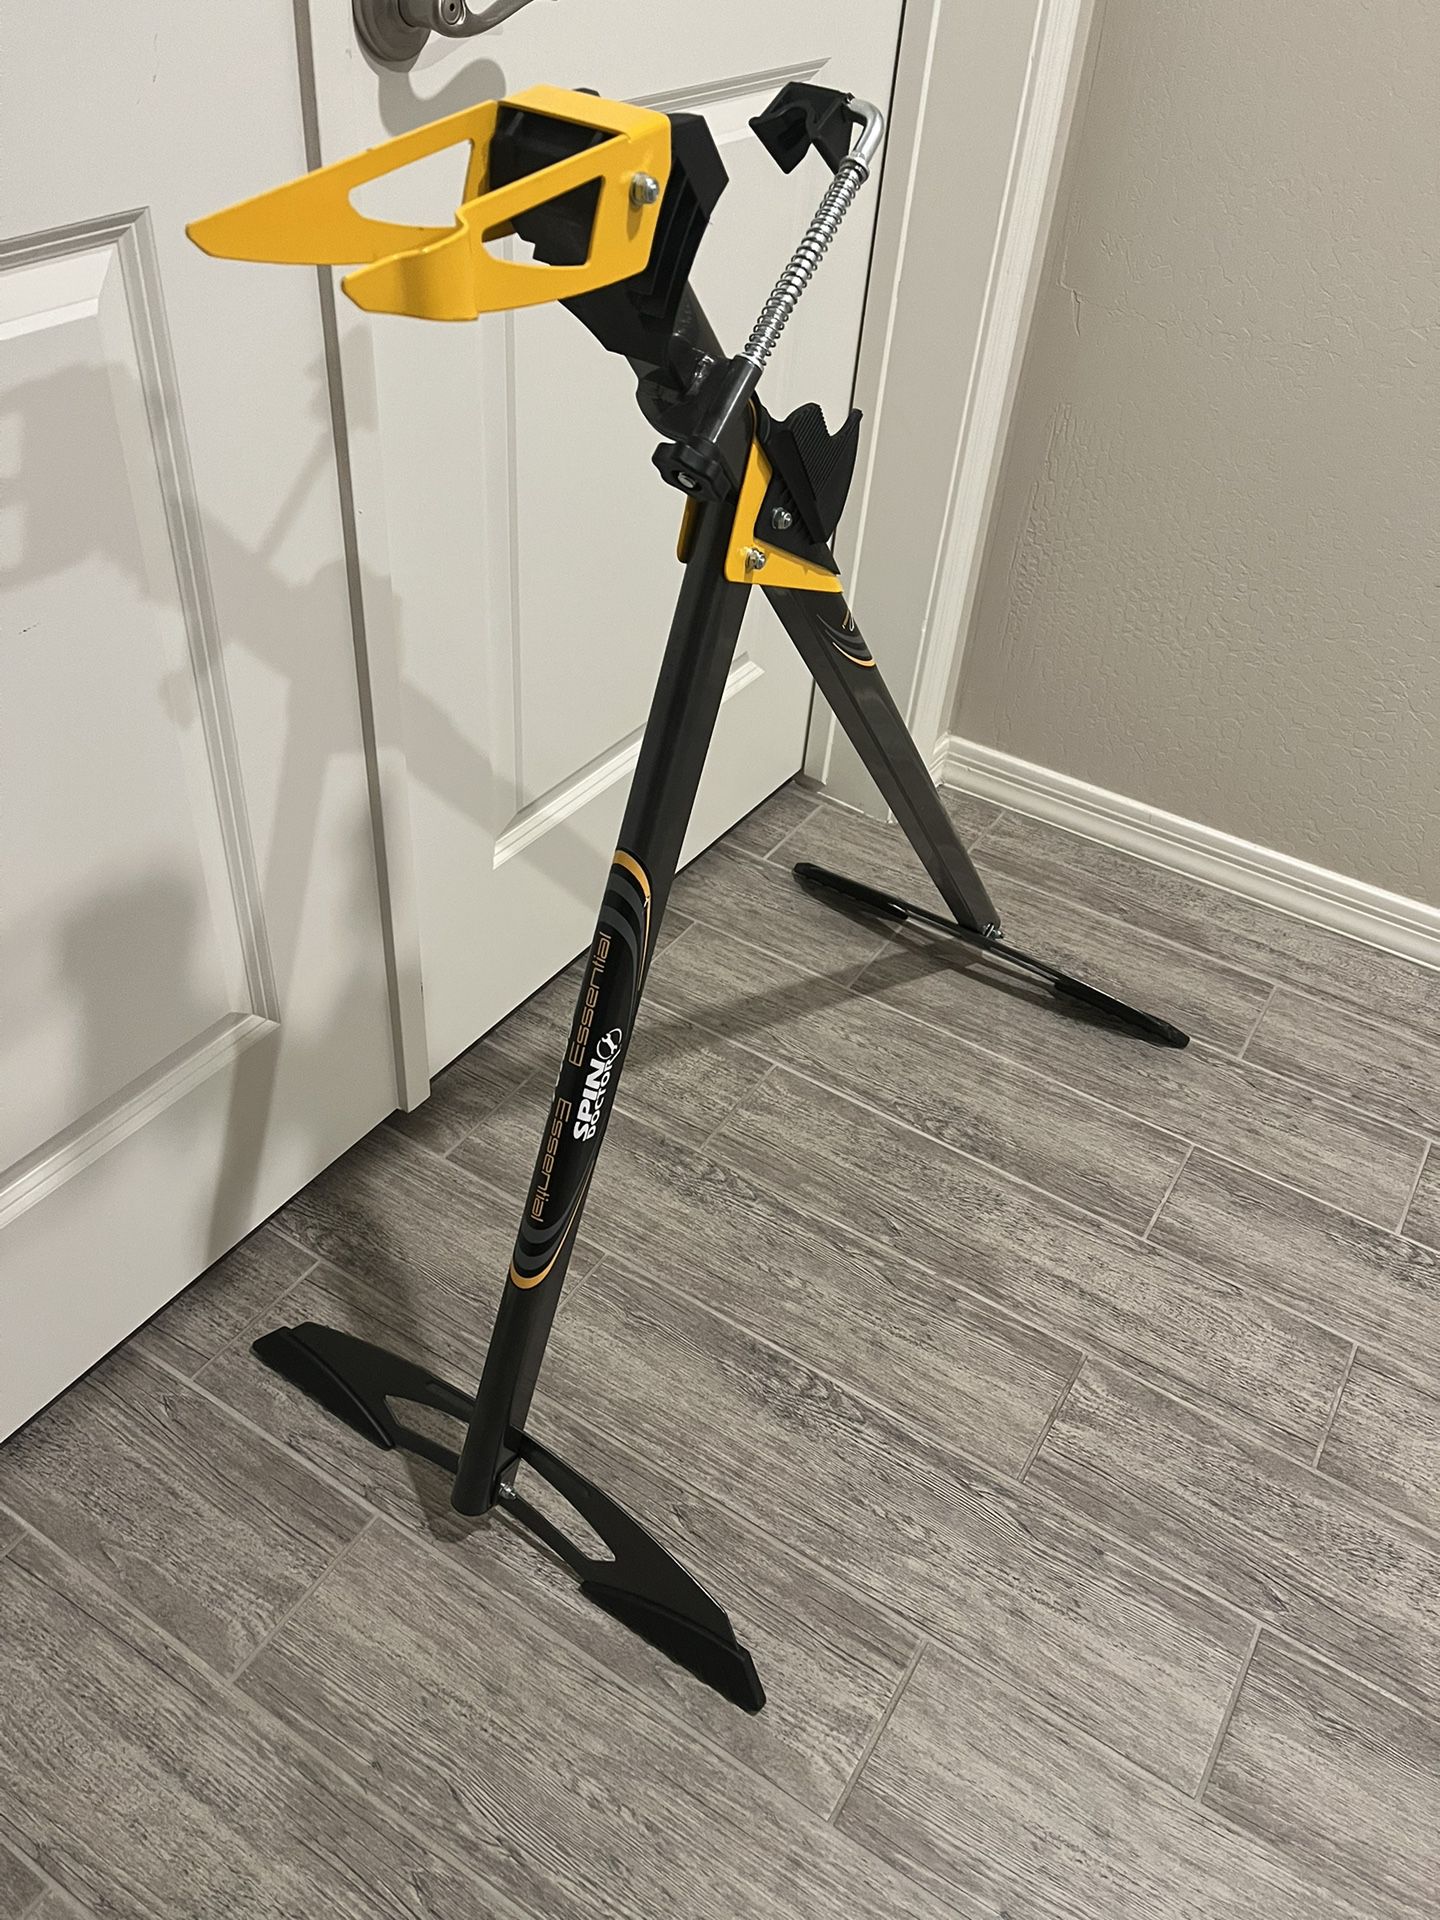 Bike Repair Stand Spin Doctor Essential for Sale in Chandler, AZ OfferUp